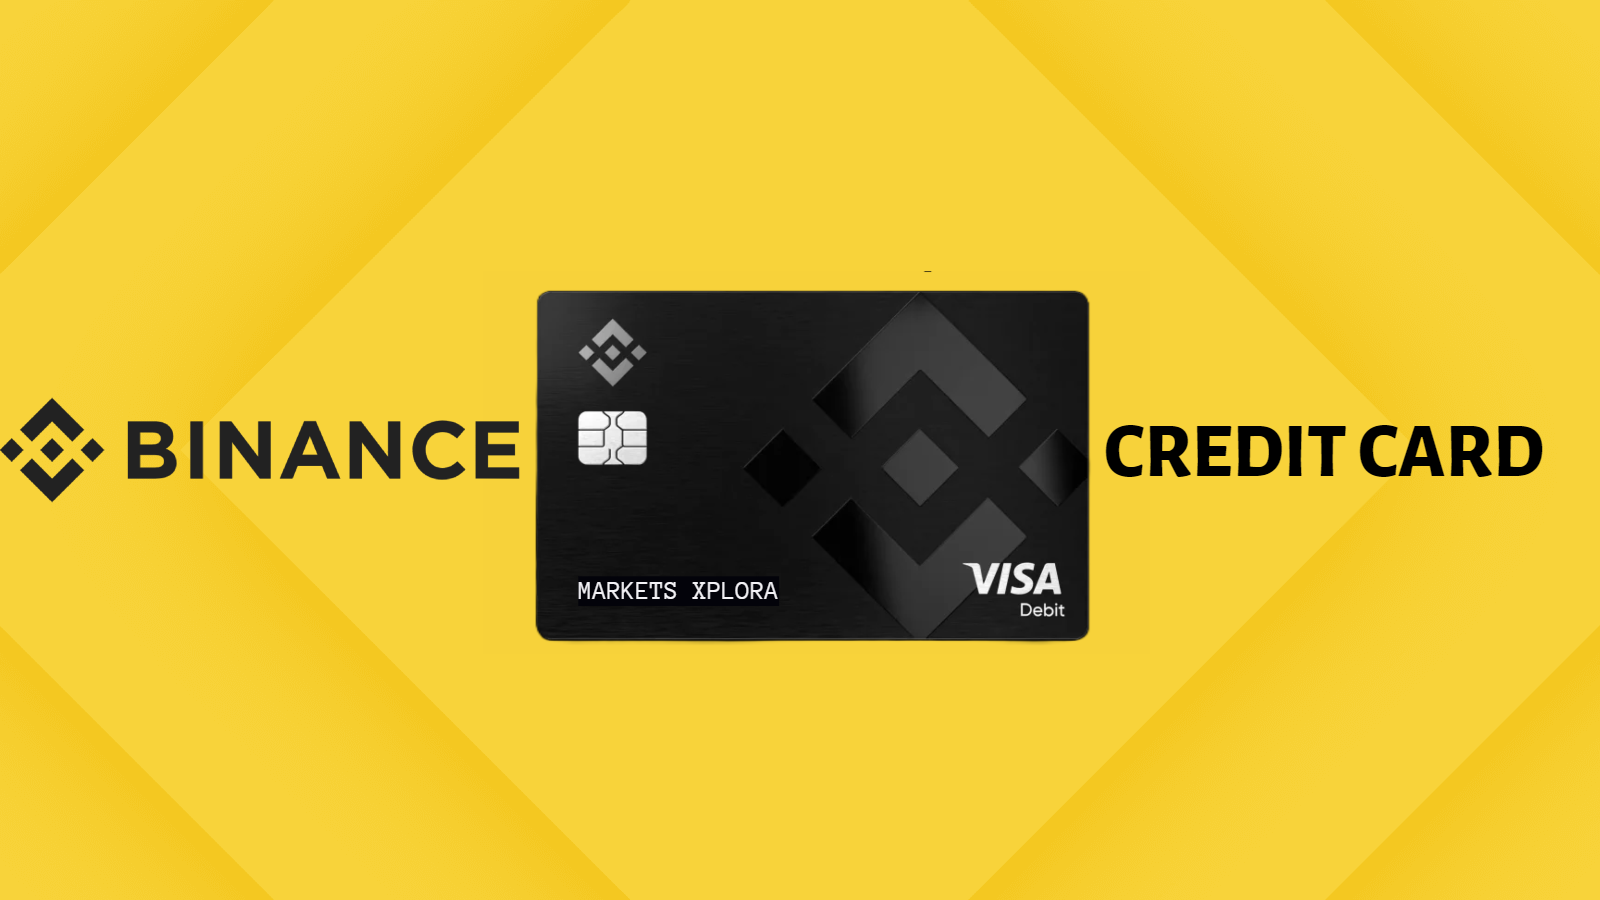 Find out everything about the Binance credit card. We reveal what the fees are incurred, what the cashback rates look like and everything else you need to know.